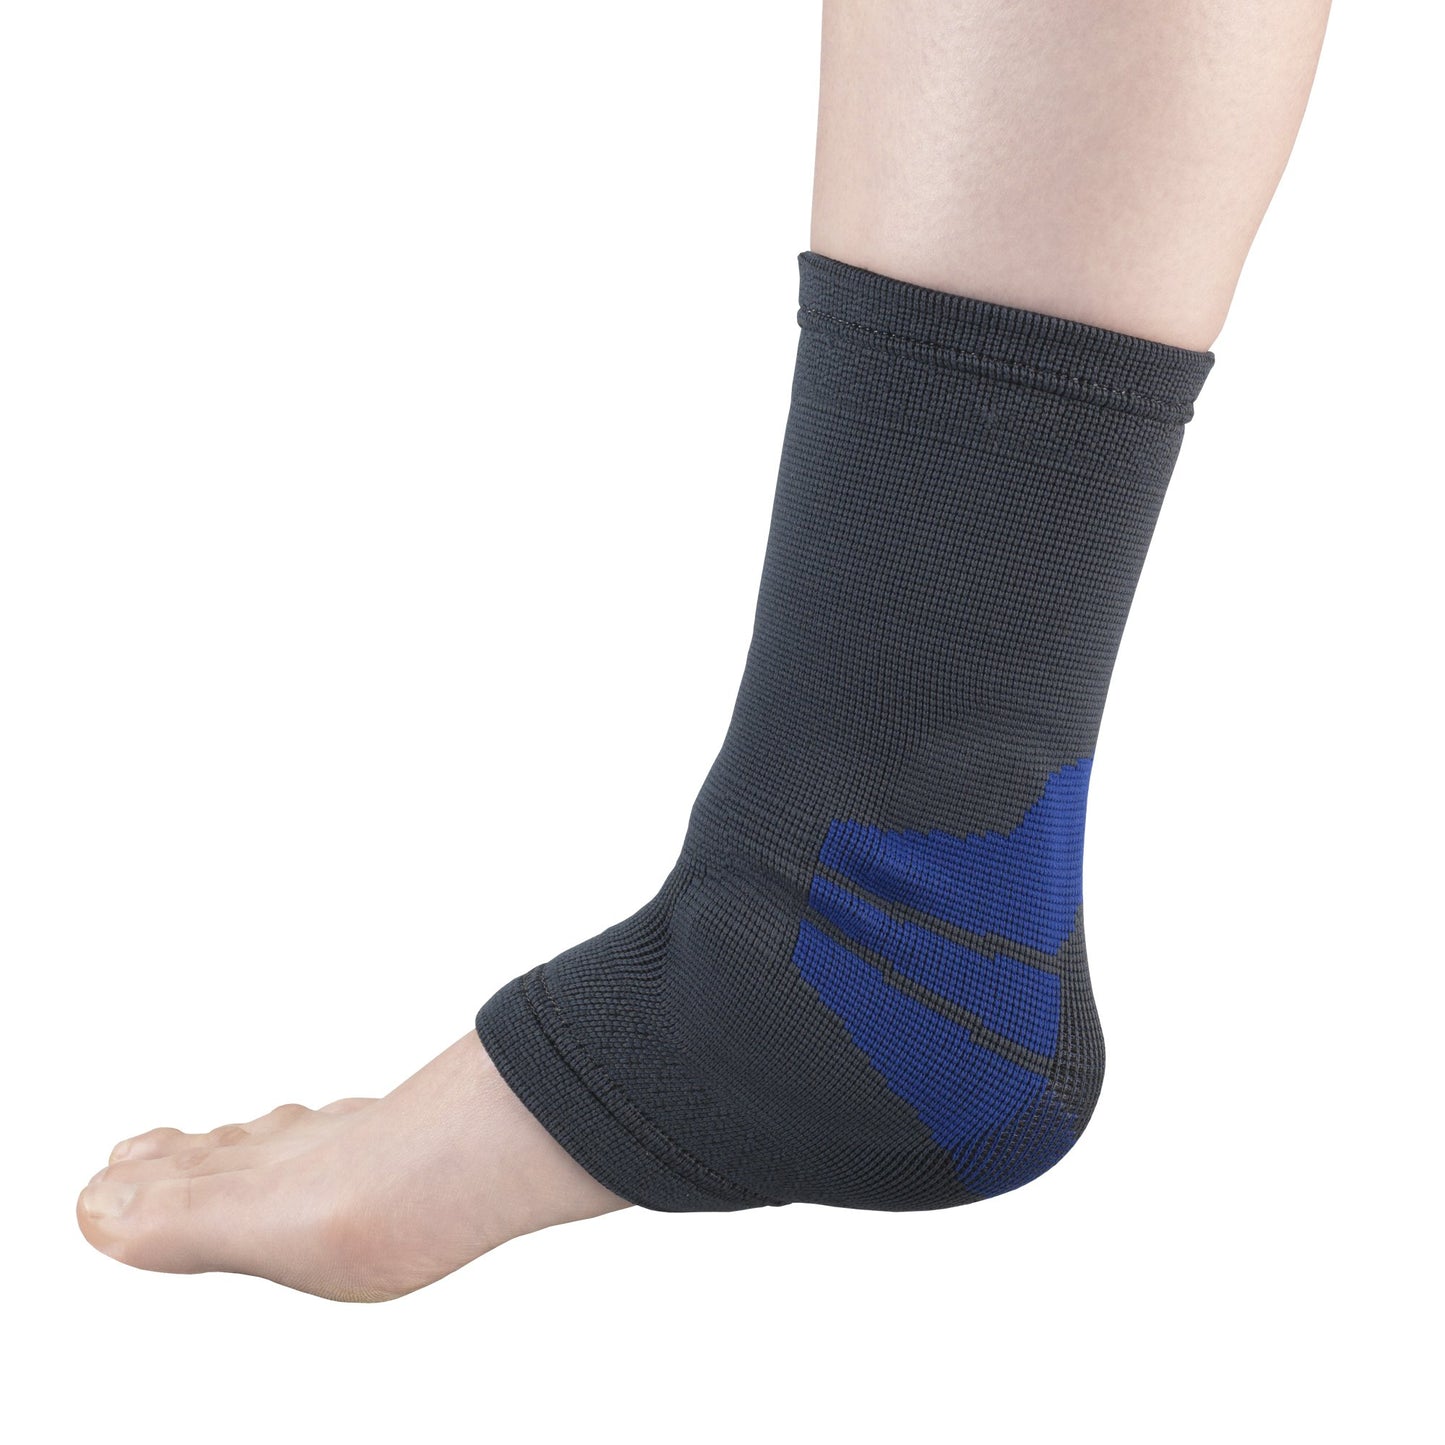 Advanced Ankle Support and Compression Gel Insert for Unparalleled Comfort and Stability